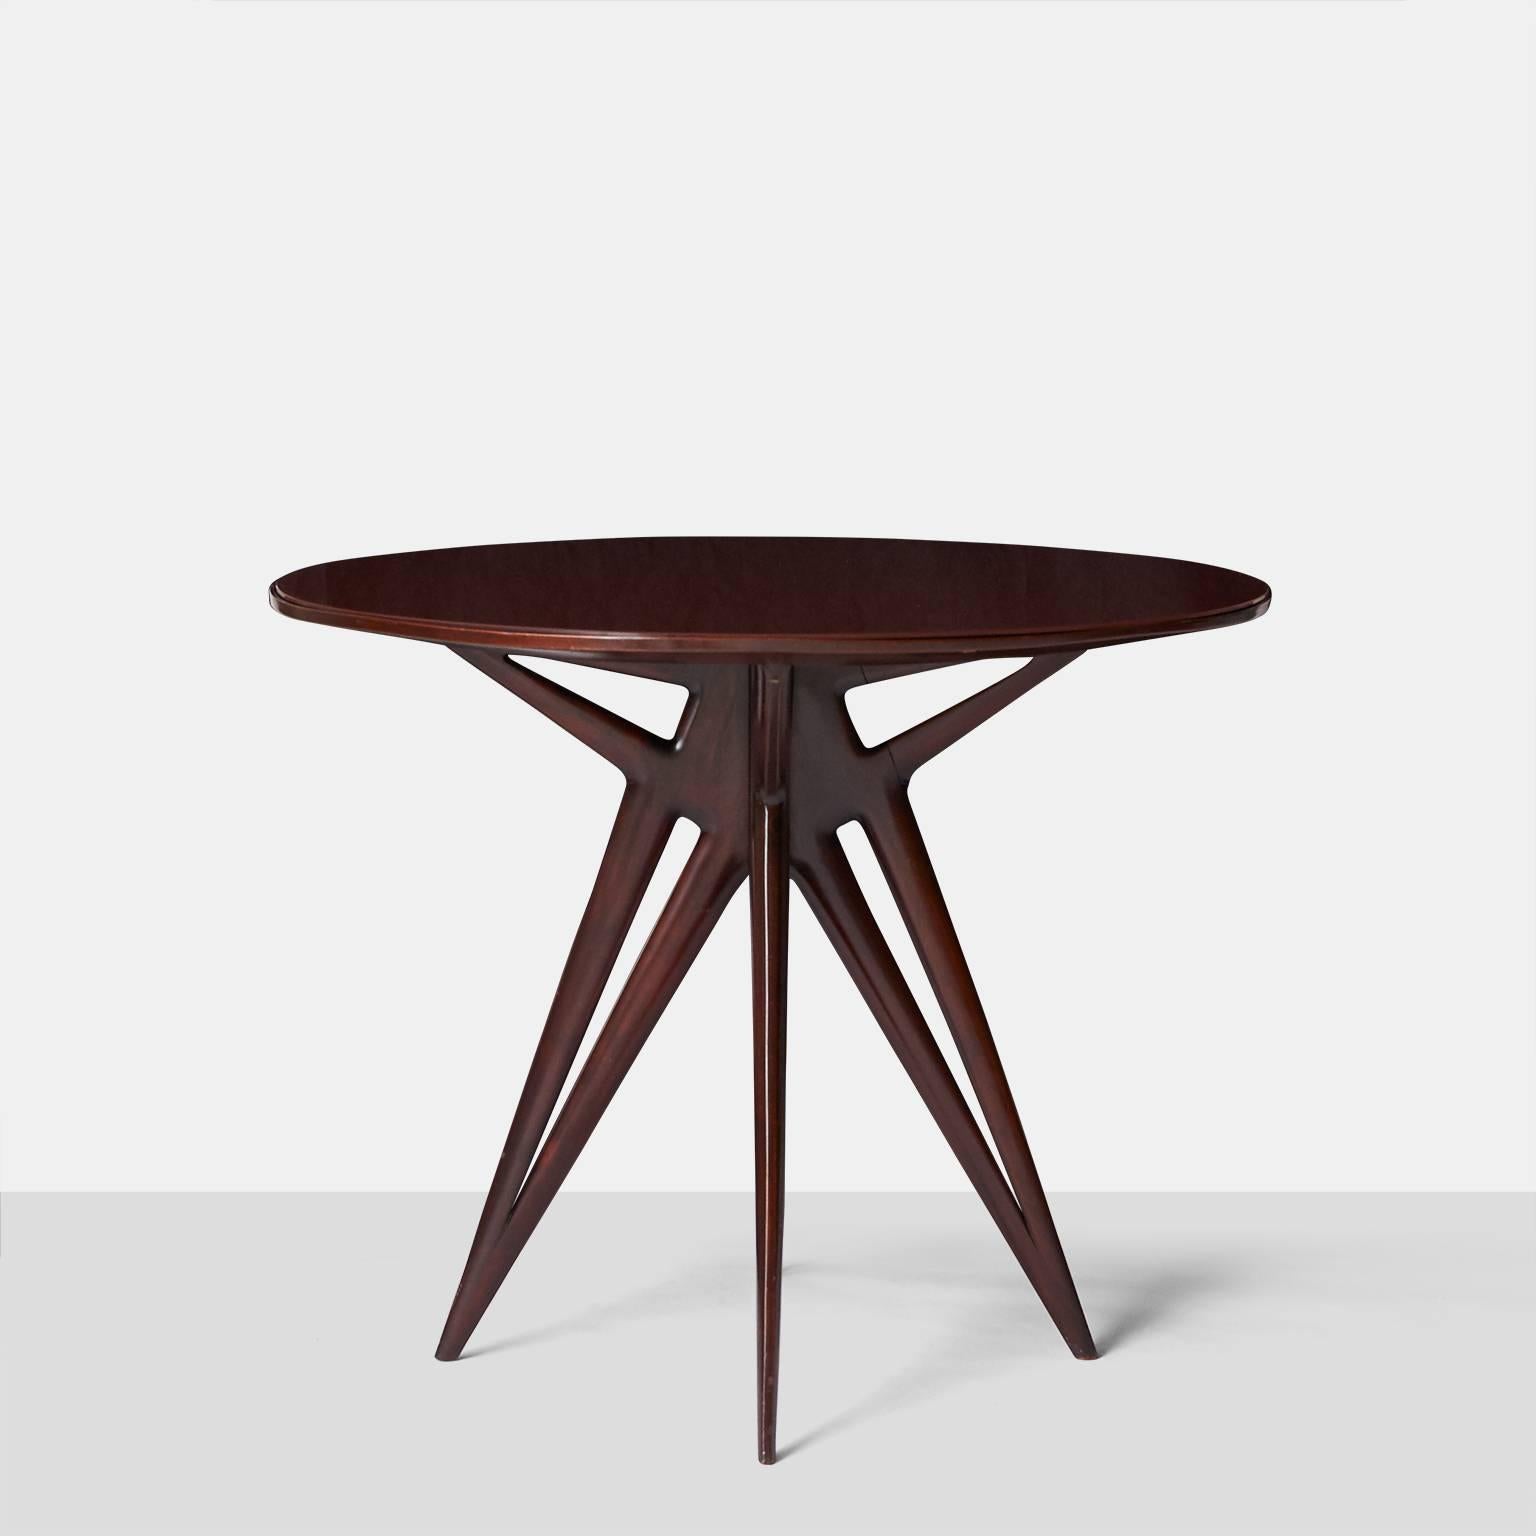 A circular center or side table in rosewood and a deep bordeaux color glass top over three legs with pierced detail.